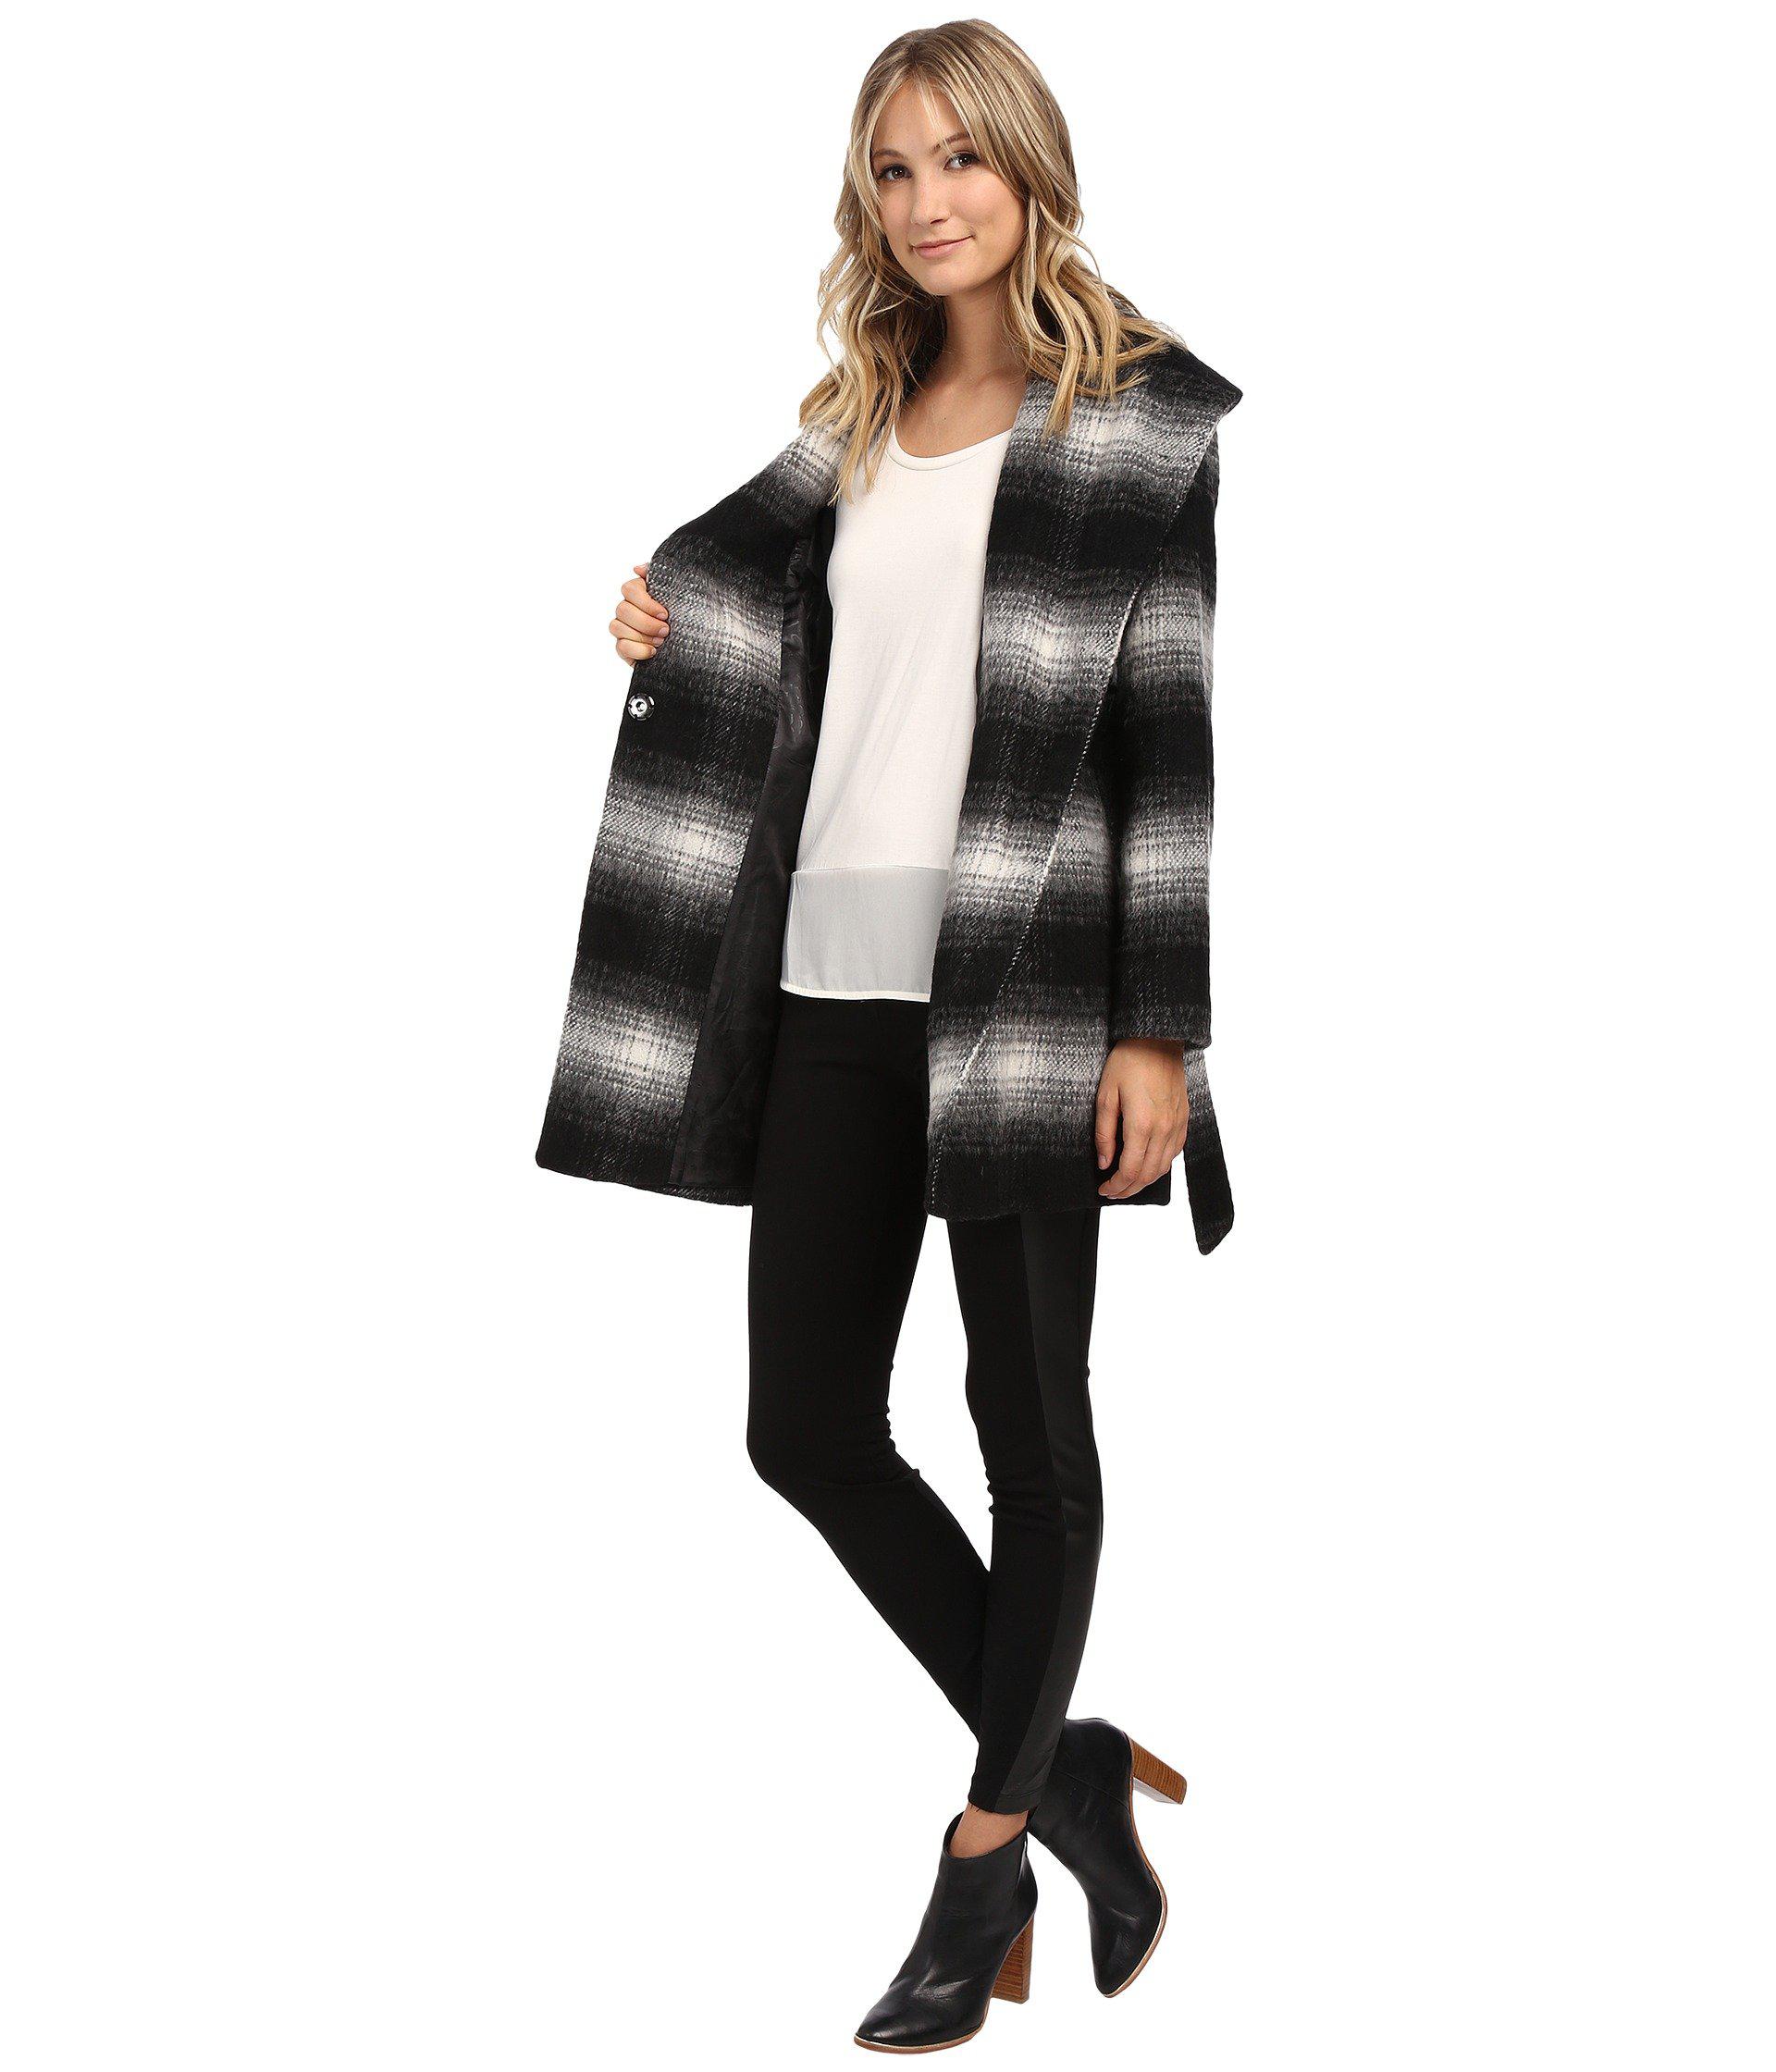 Jessica Simpson Brushed Wool Wrap Coat in Black - Lyst